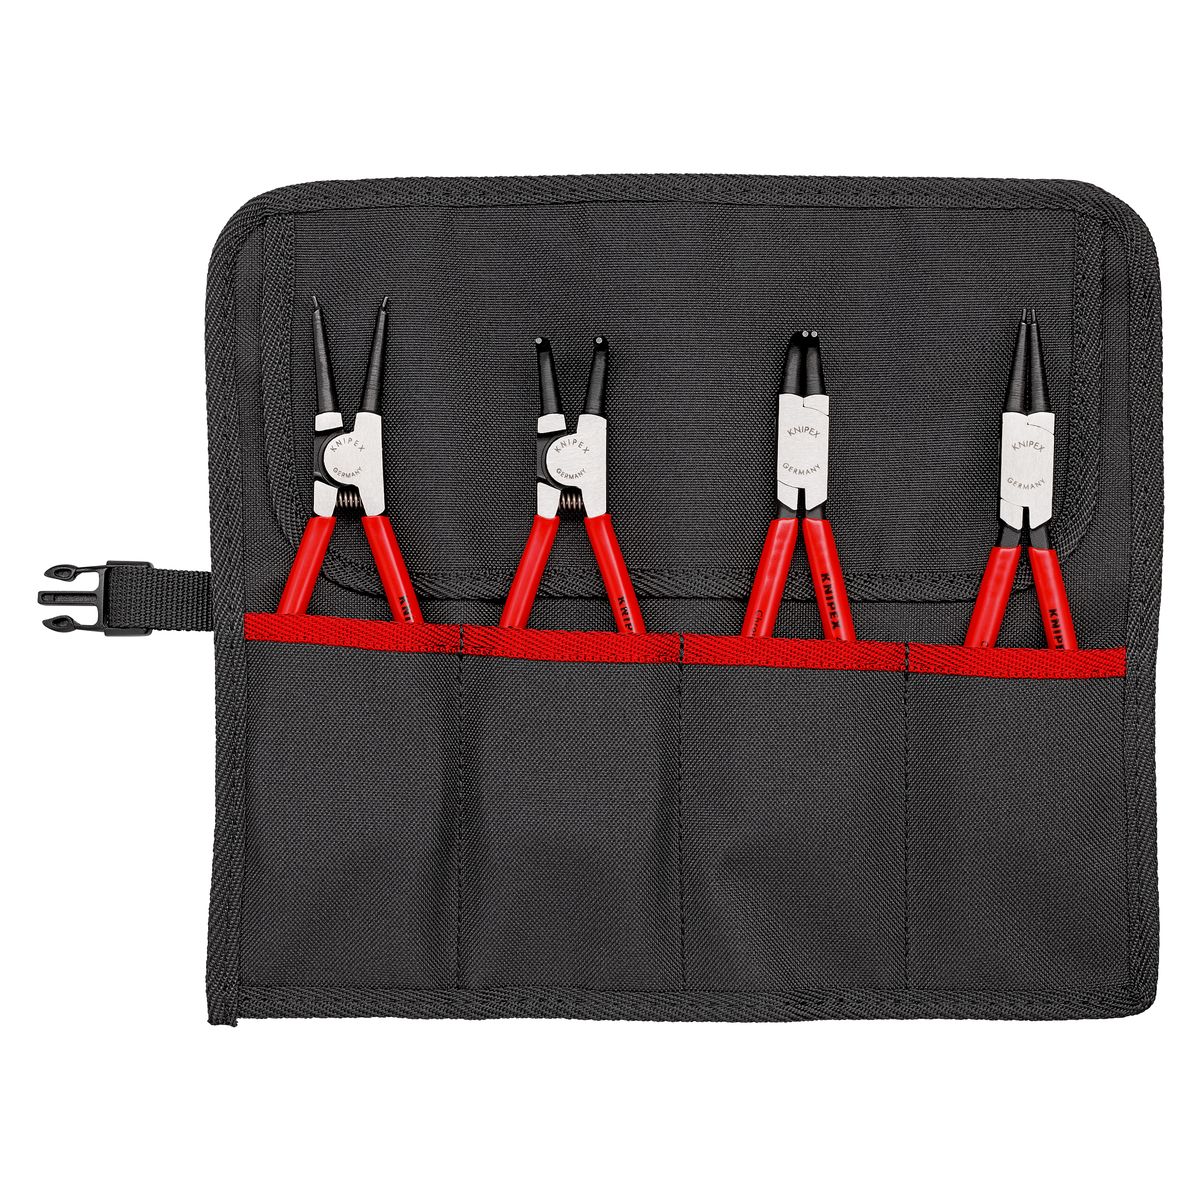 ROLL BAG WITH 4 PLIERS 001956 Knipex